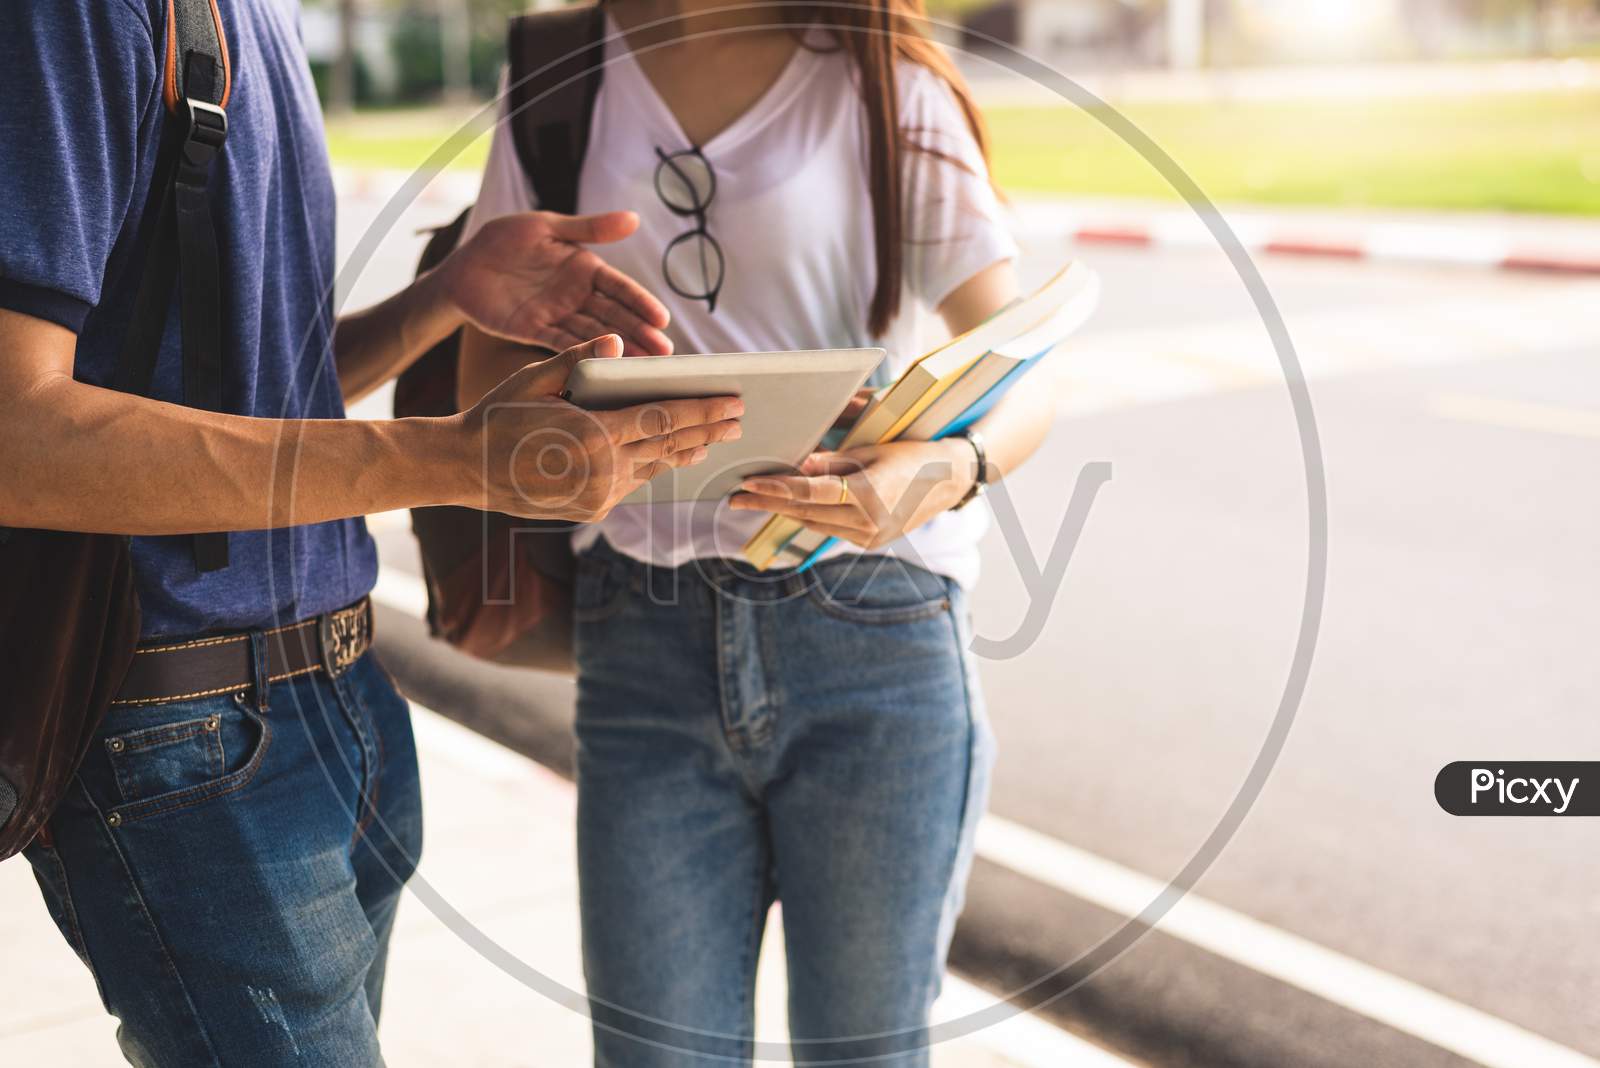 Close Up Of Two College Student Discussion With Tablet. Girl Holding Books Talking To Boy In University Or School. Education And Lifestyle Learning. Technology And Self Learning Concept